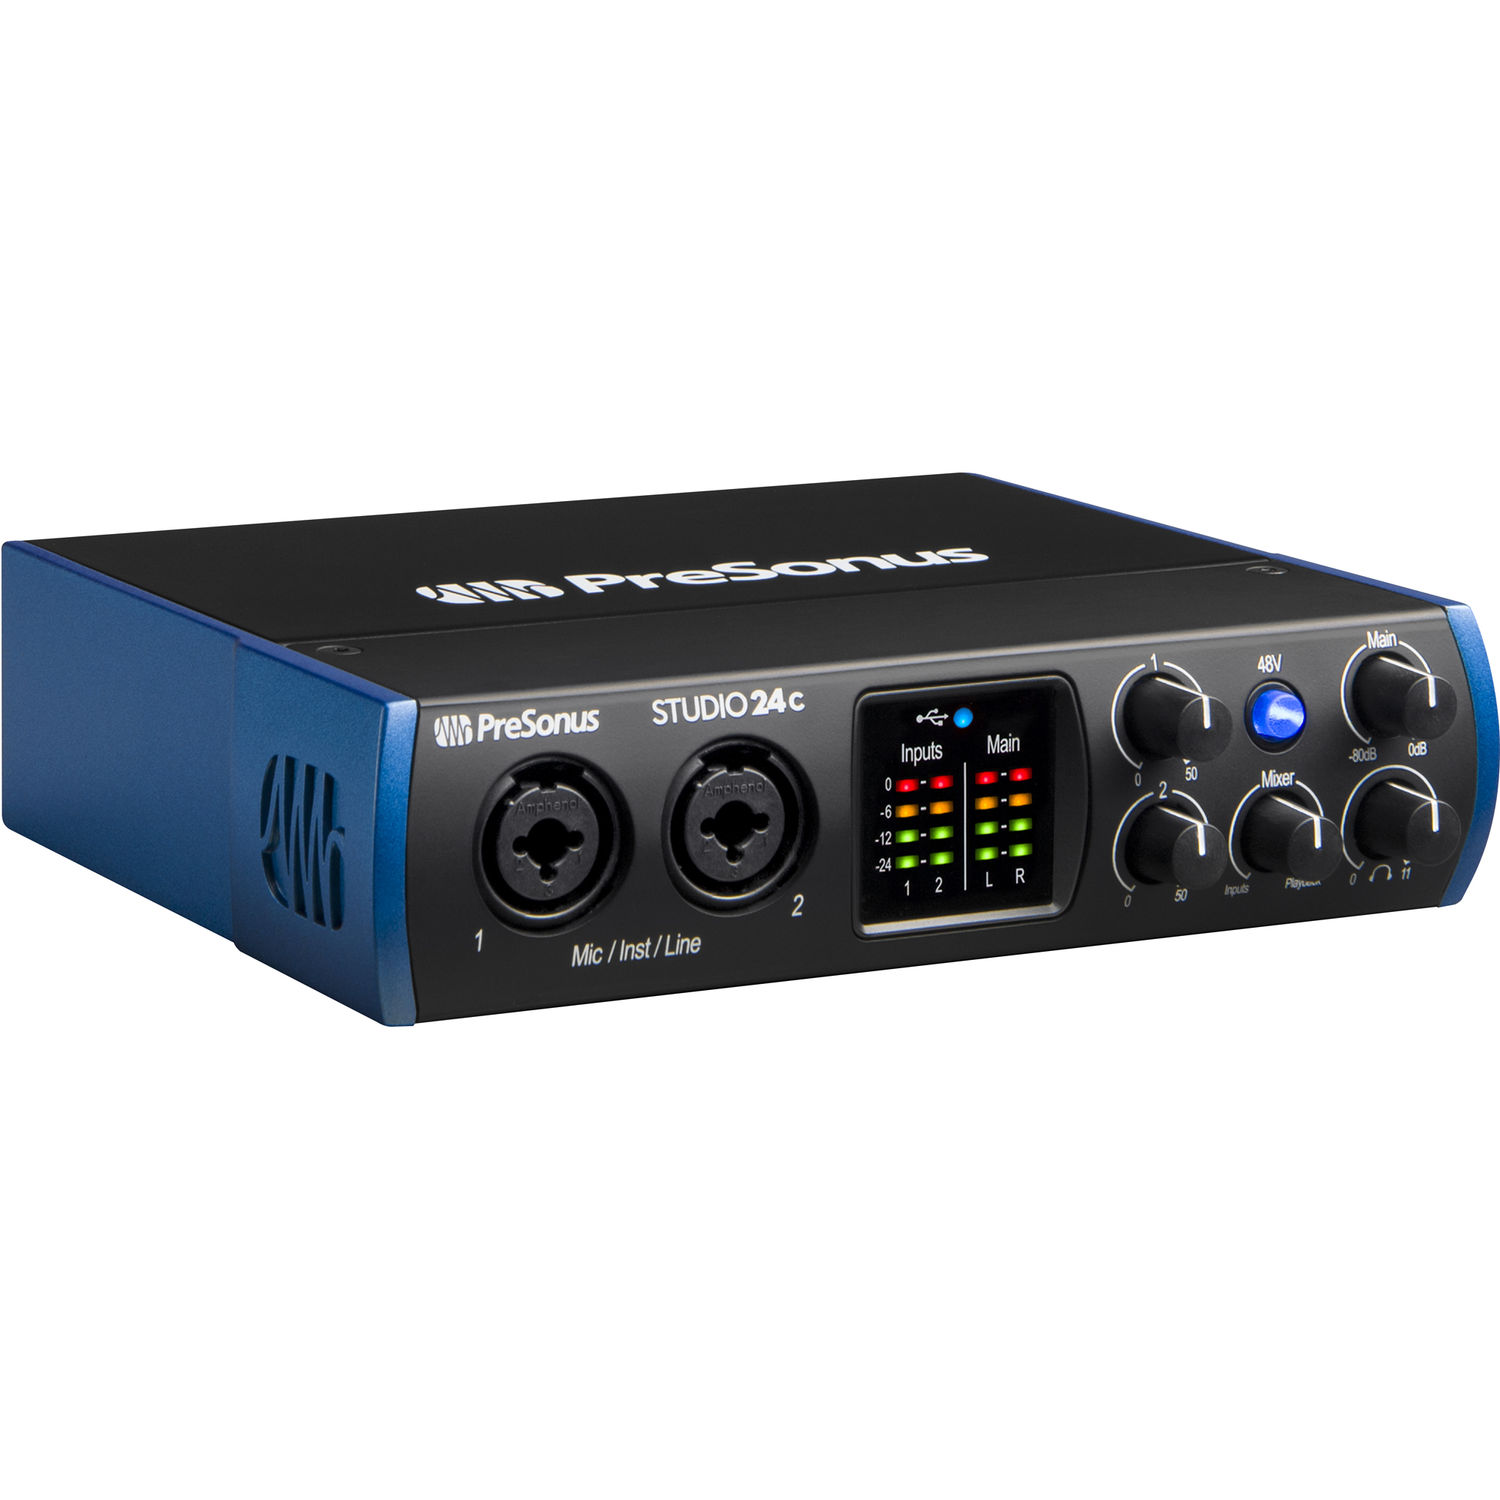 Polished hail Butcher Master Series by Sound Professionals MS-MULTITRACK-PRO-LITE - Professional  2 channel Multitrack/Mixer USB interface for Court Reporters using CAT  software - with 1 wired and 1 wireless microphone MS-MULTITRACK-PRO-LITE